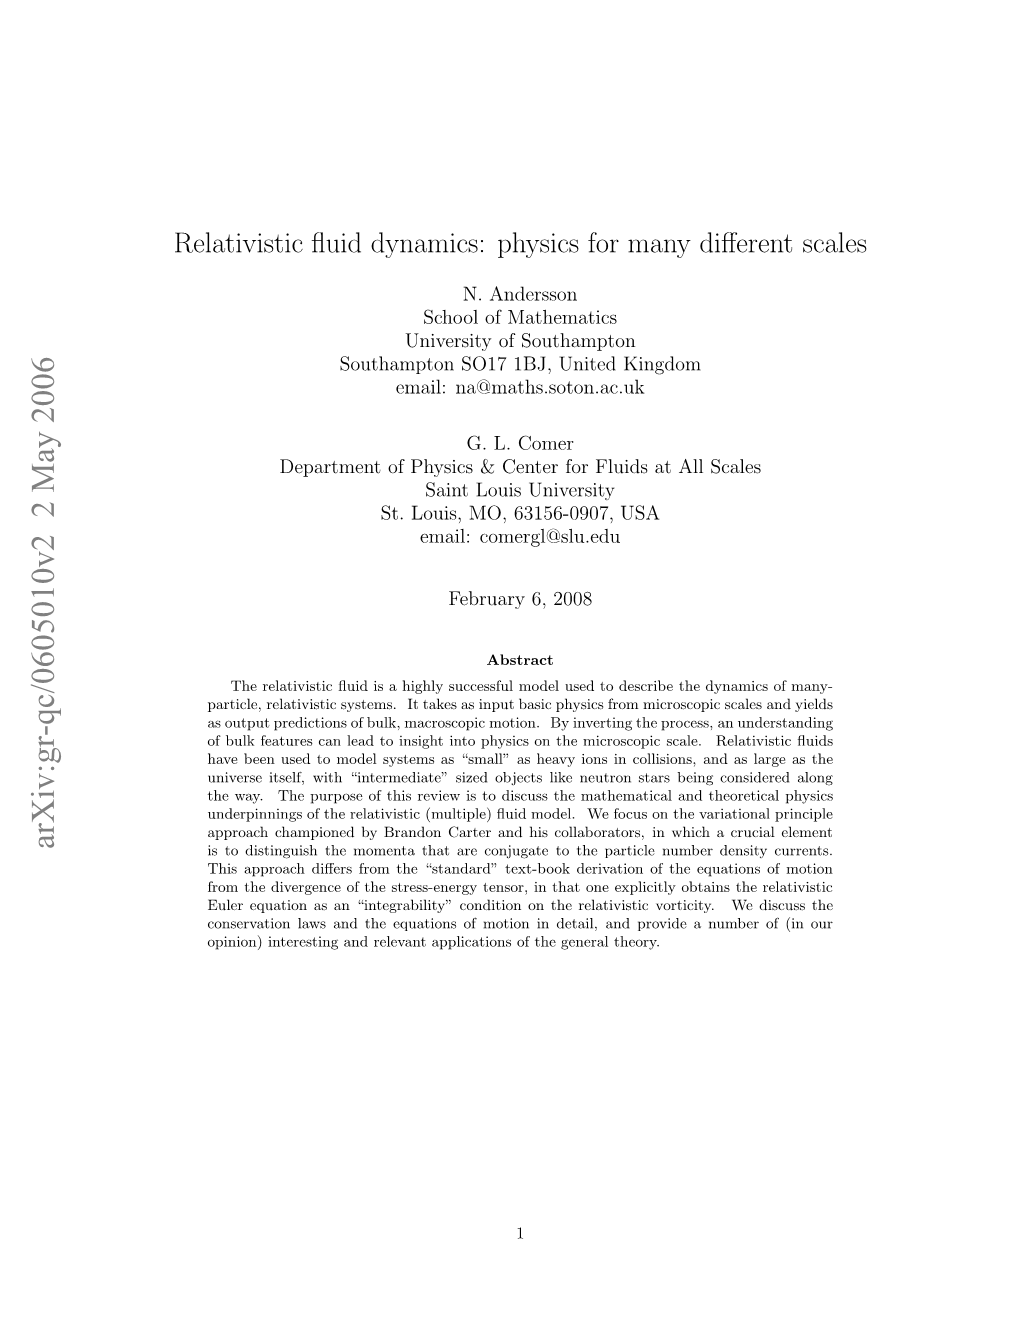 Relativistic Fluid Dynamics: Physics for Many Different Scales